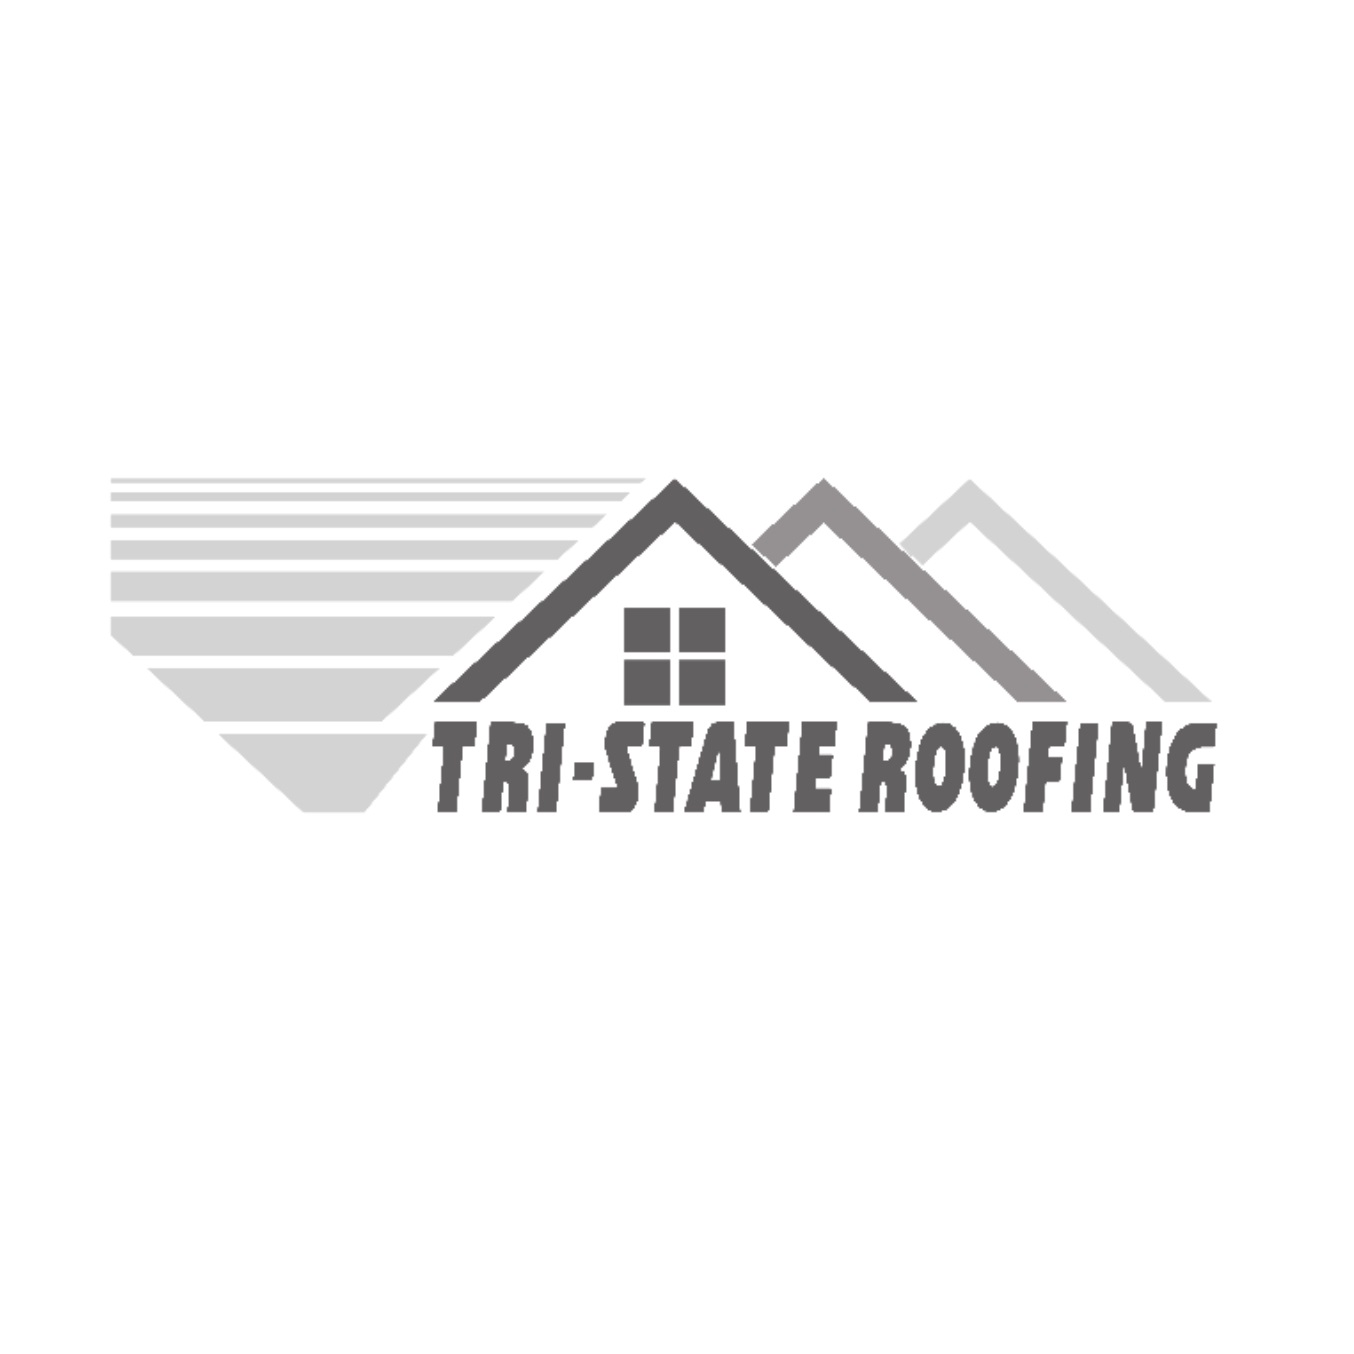 Tri State Roofing II